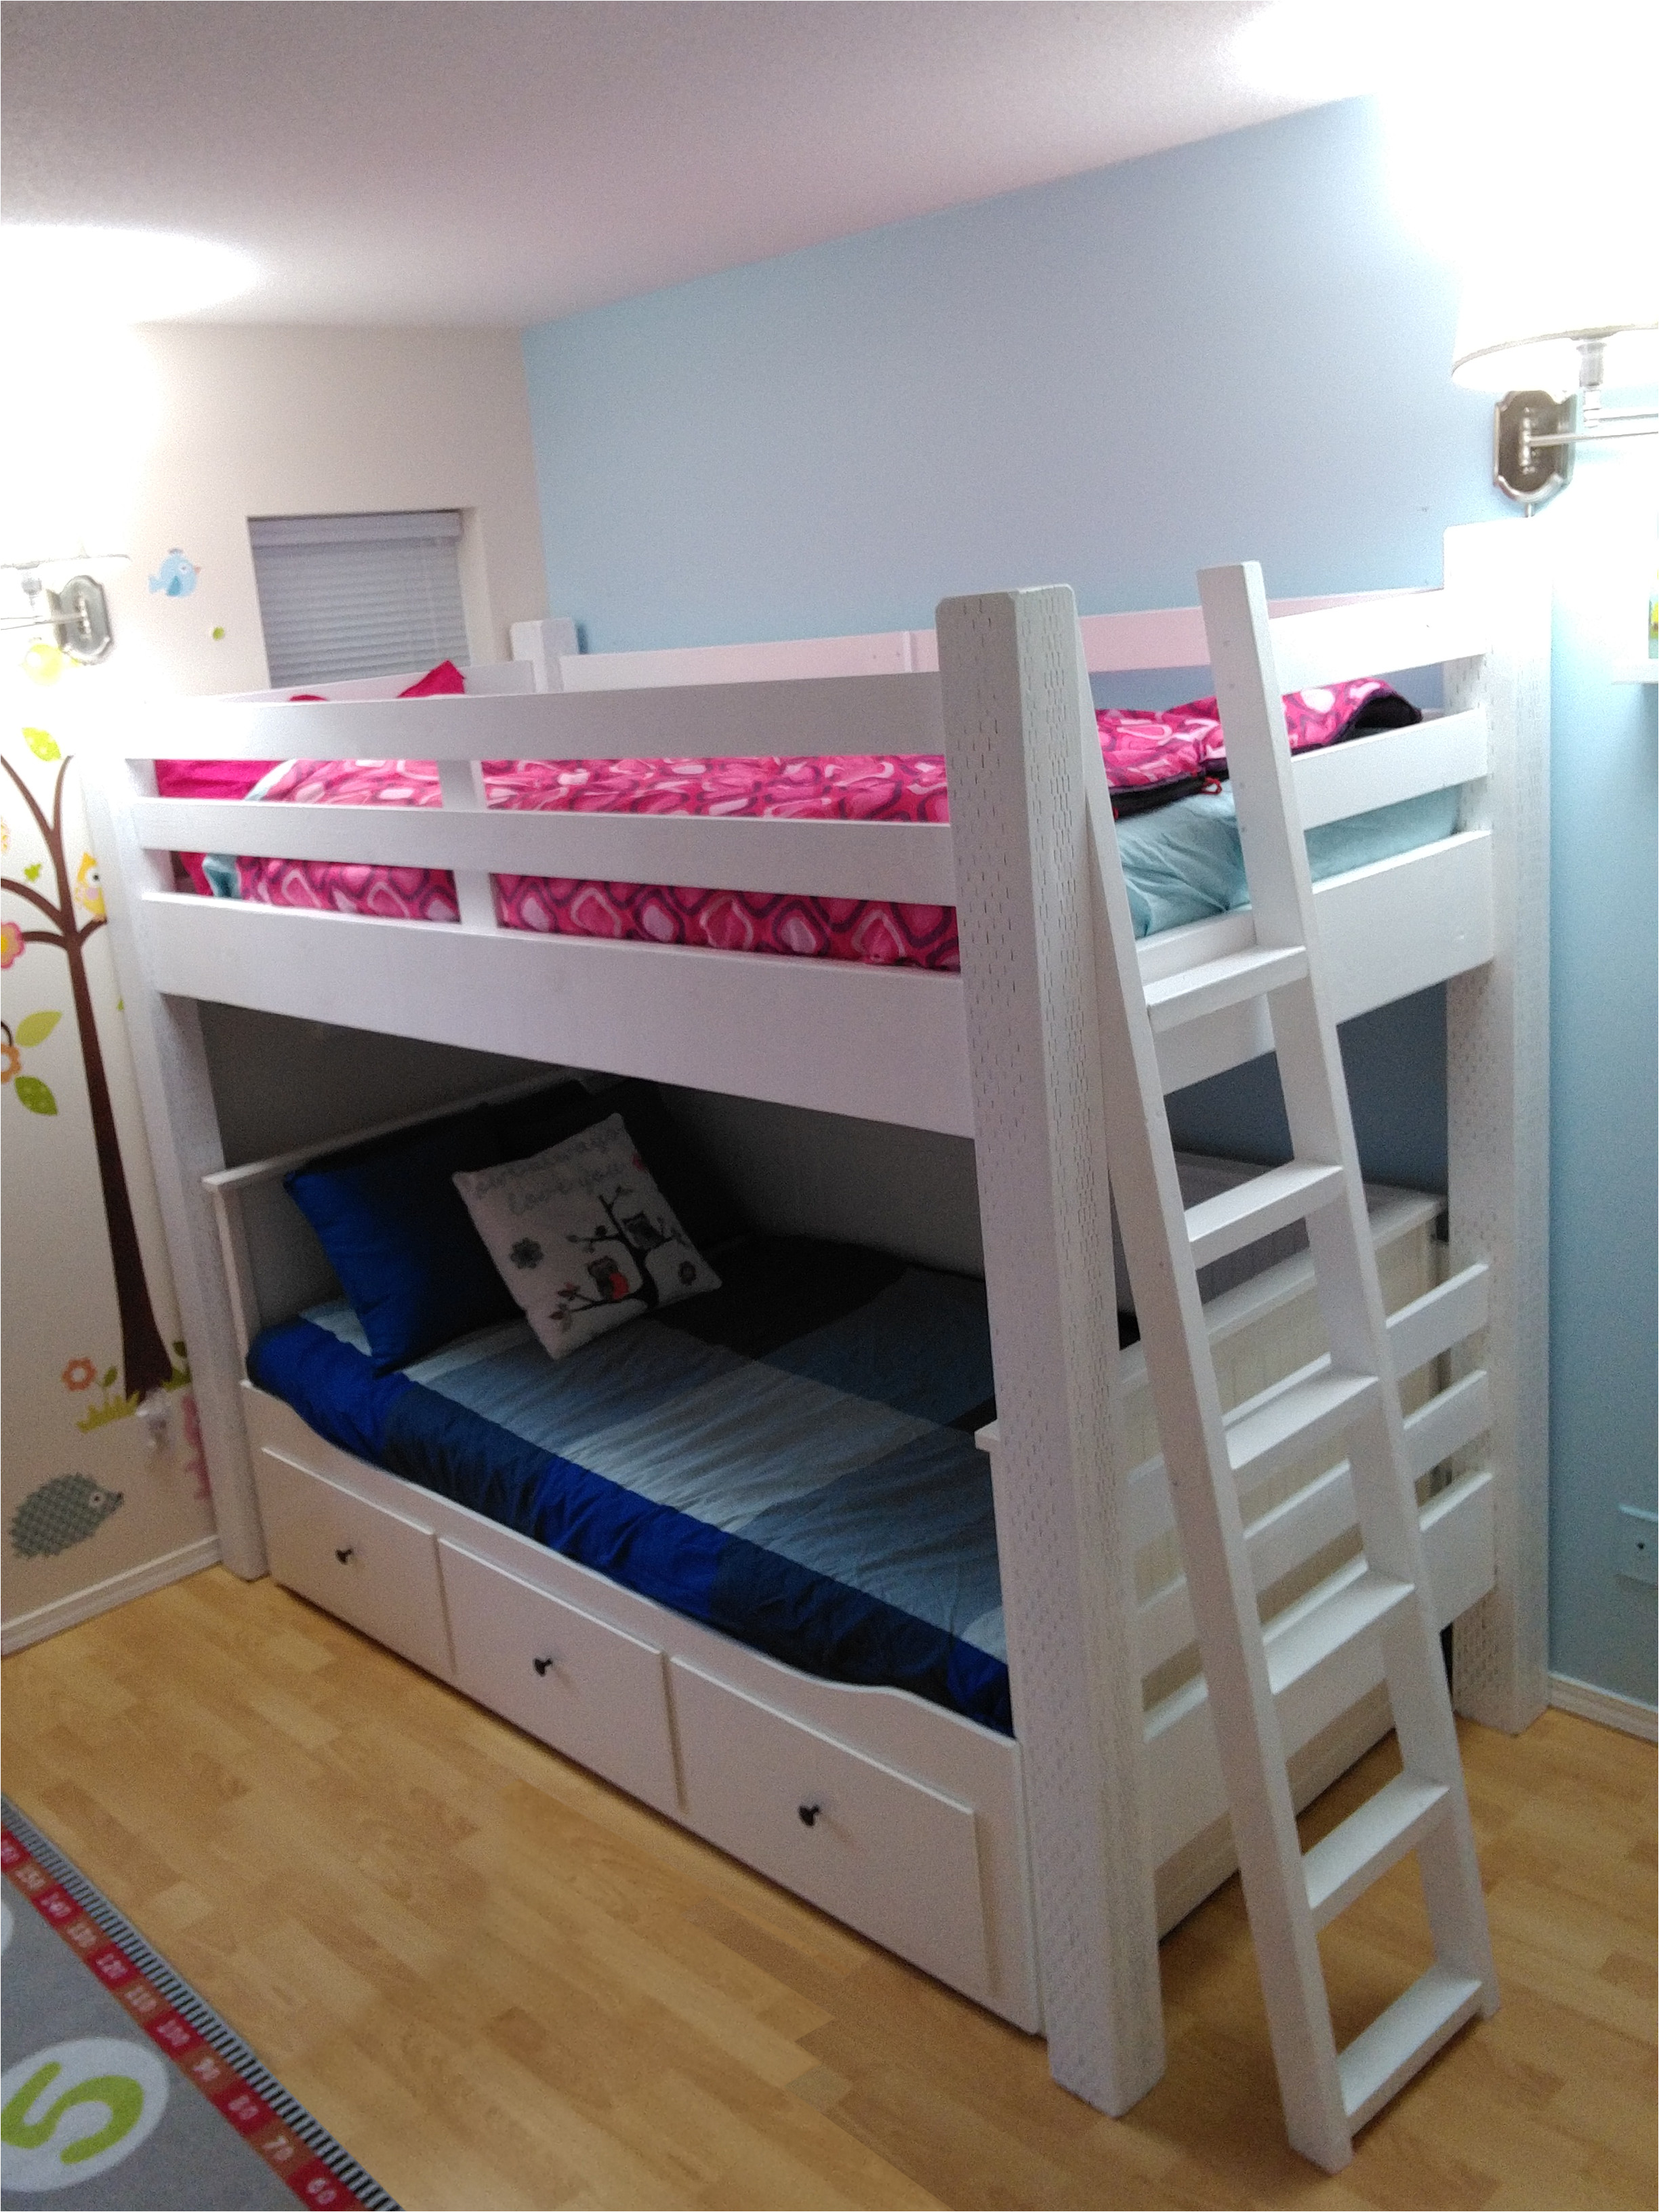 Ikea Hemnes Daybed Manual Custom Loft Bed Built to Wrap the Ikea Hemnes Daybed Kids Room